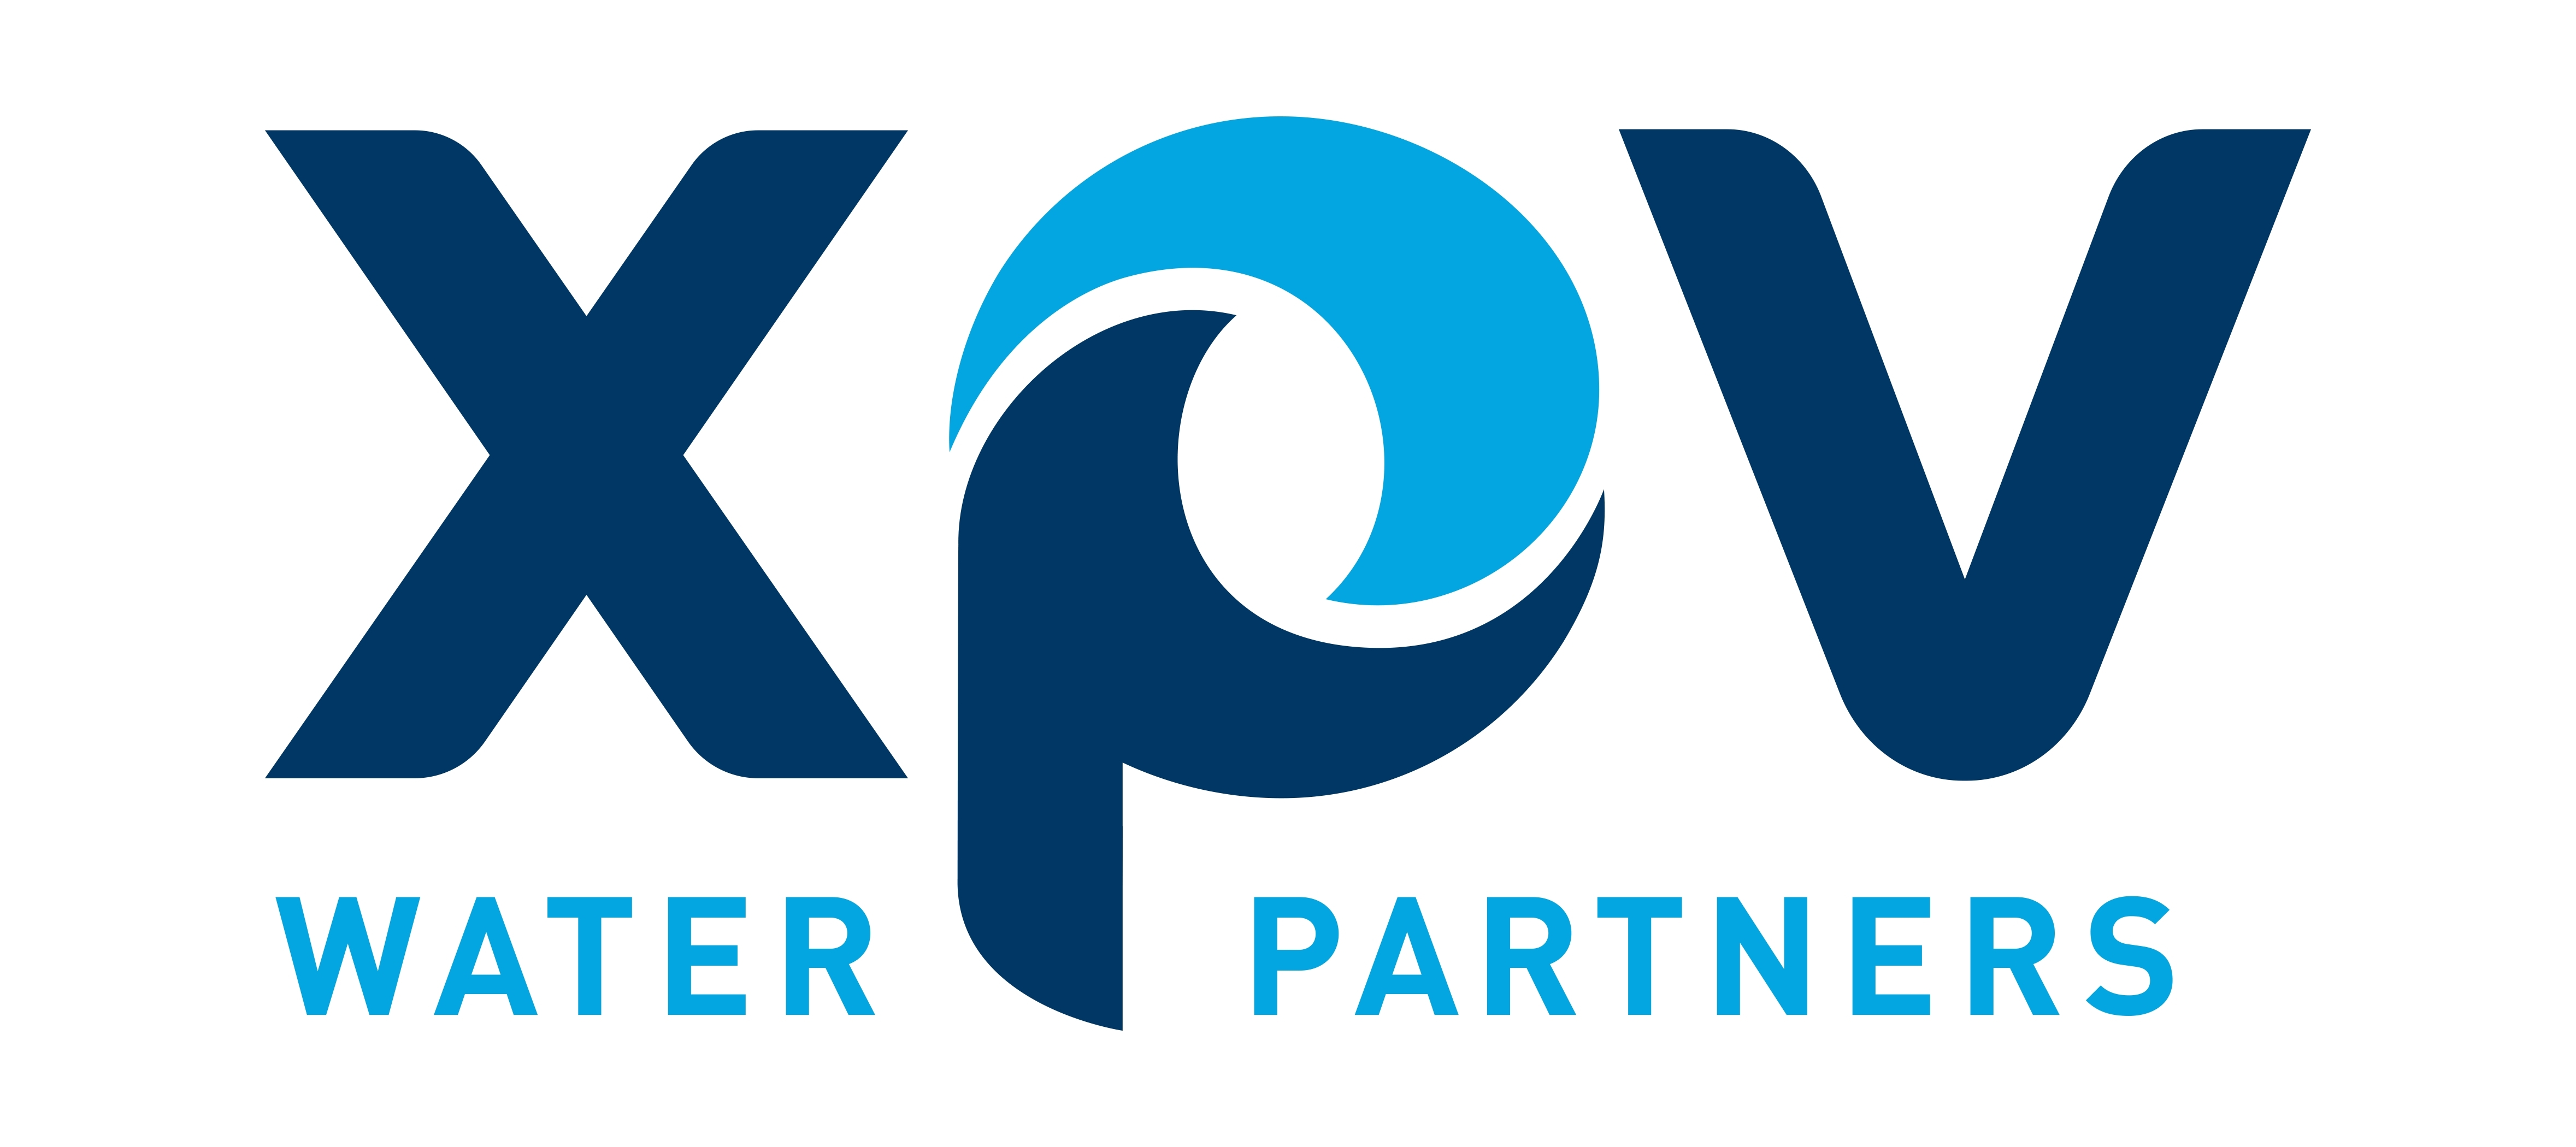 Kkr And Xpv Water Partners Form New Platform To Promote Water Quality Business Wire